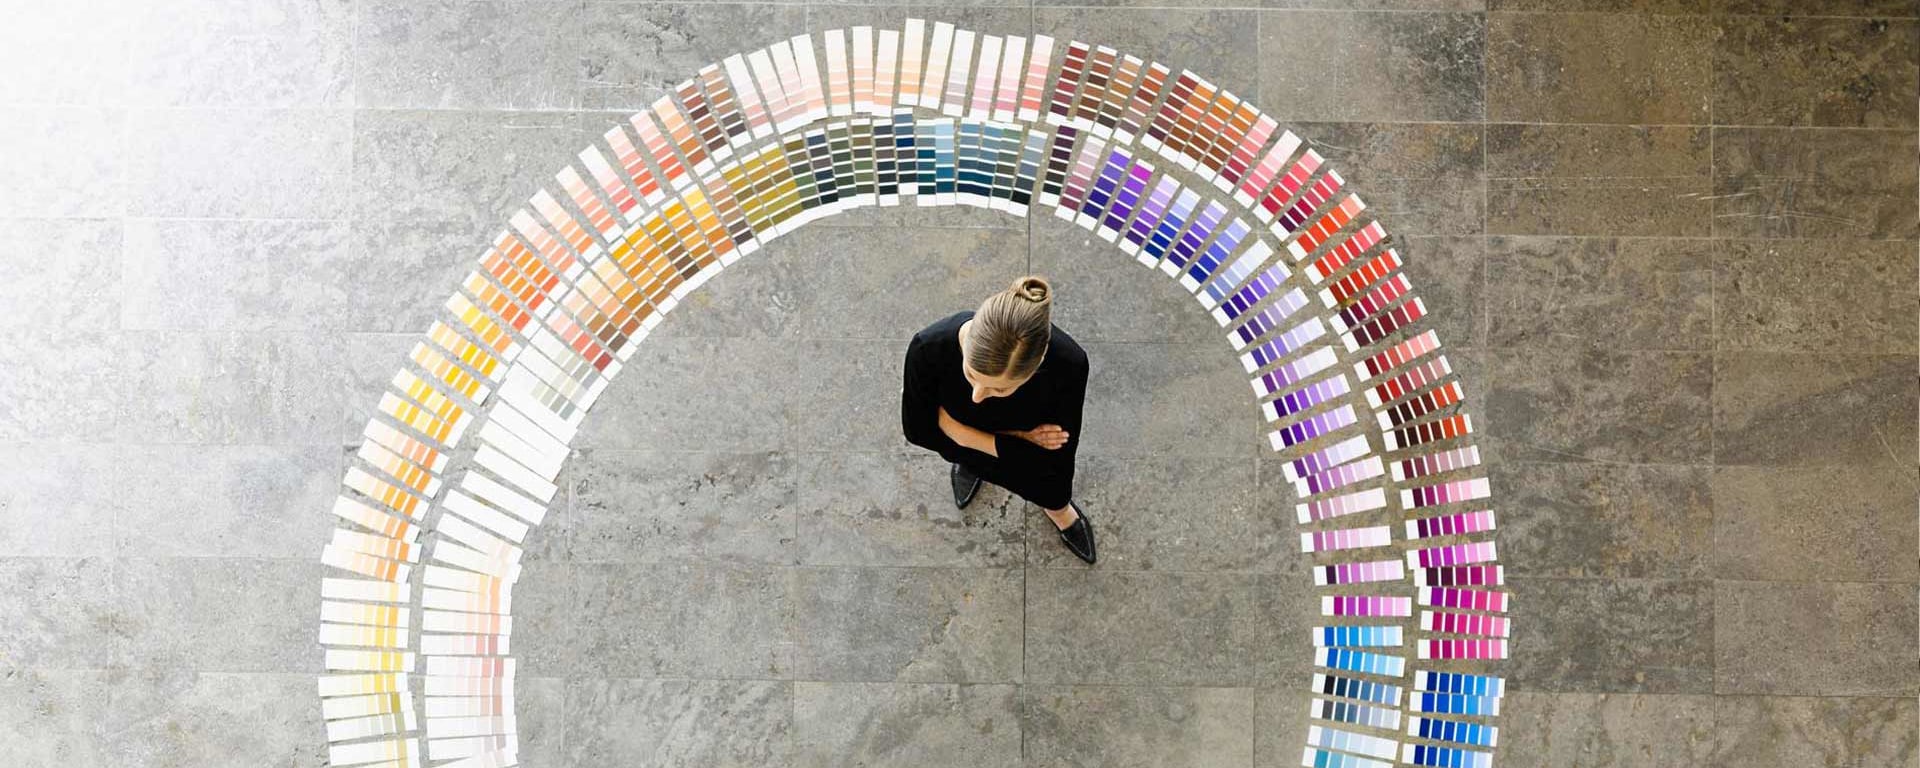 A woman stands in front of a circle of different colors and thinks